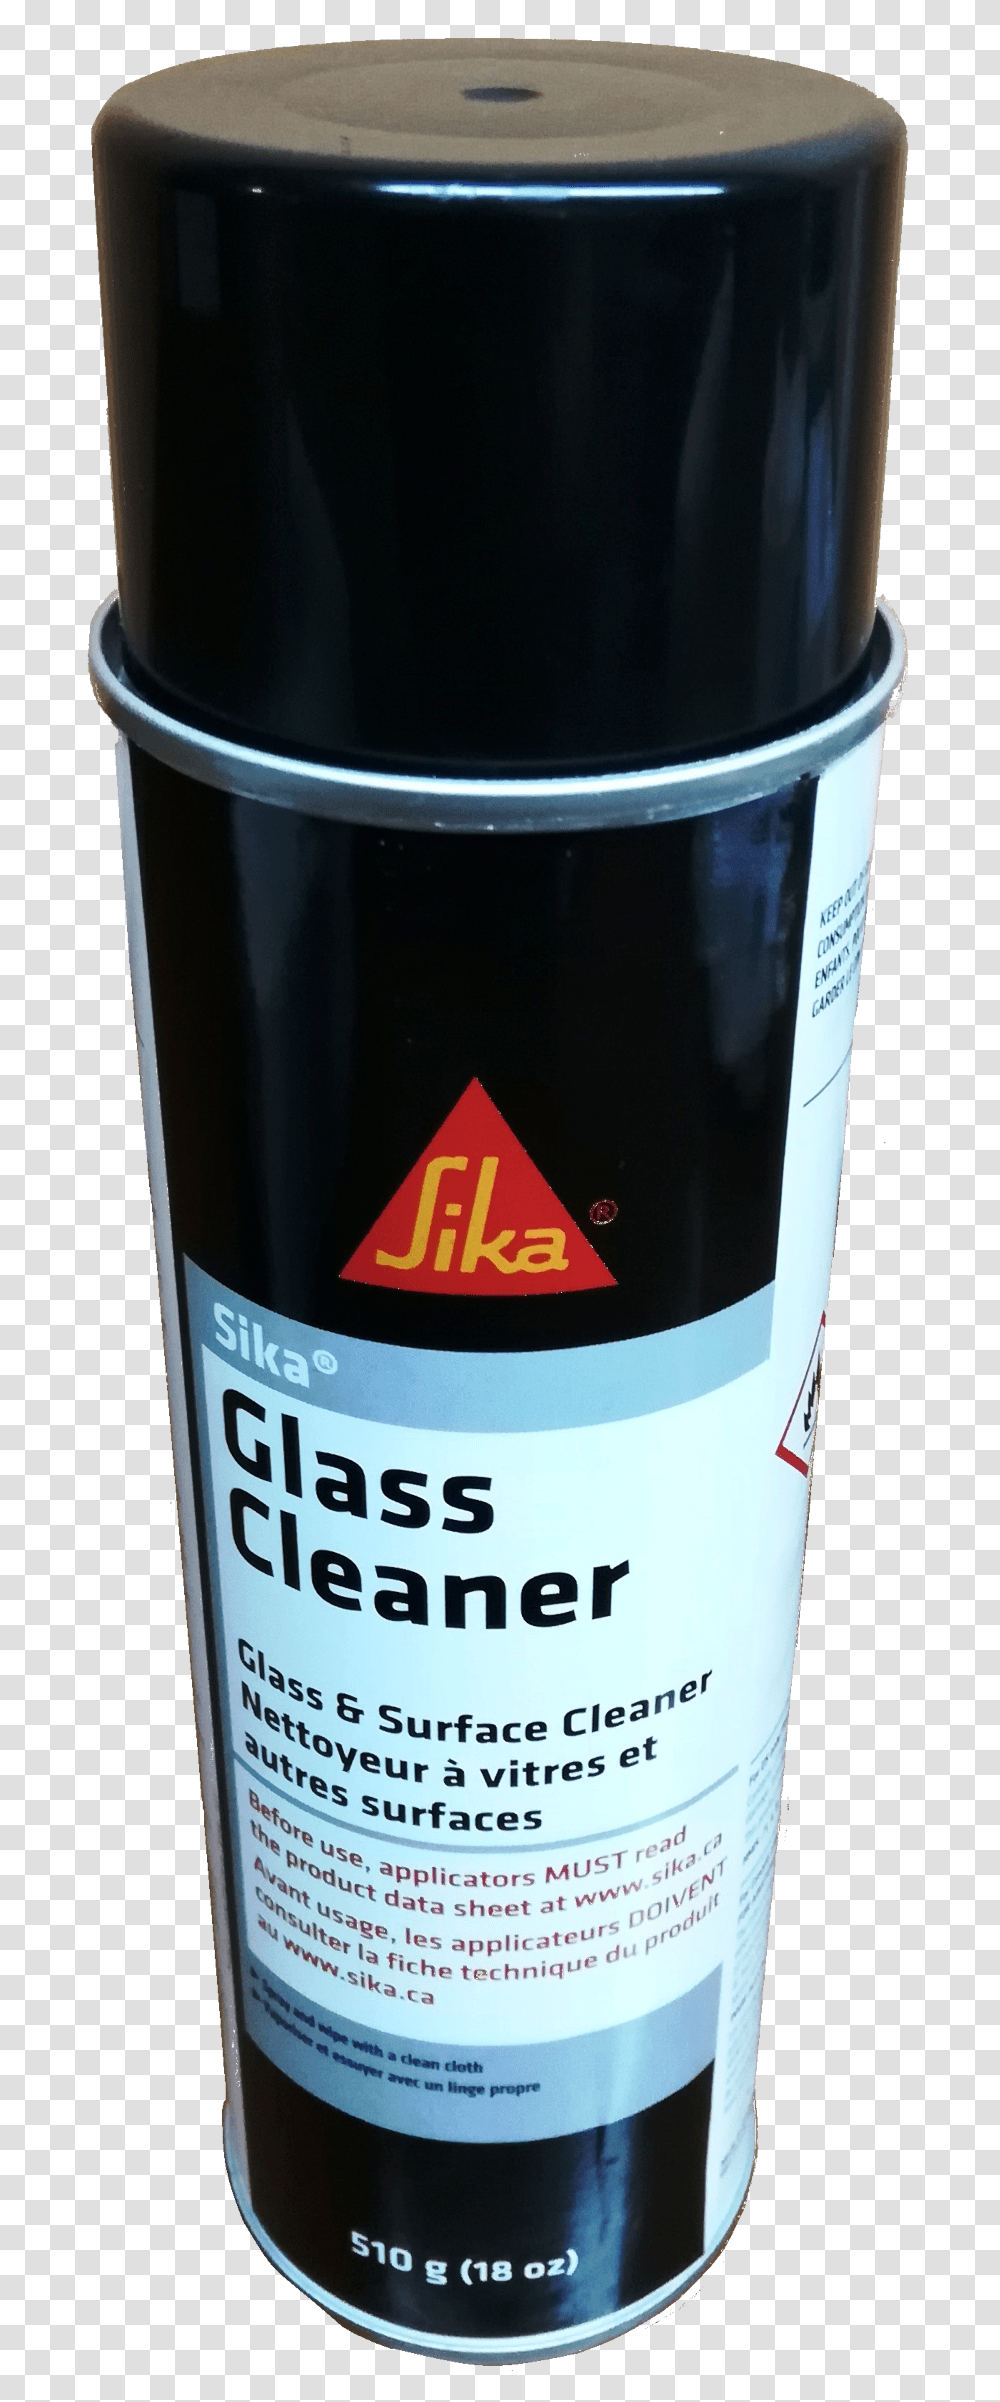 Glass Cleaner Sika Cylinder, Tin, Can, Beer, Alcohol Transparent Png